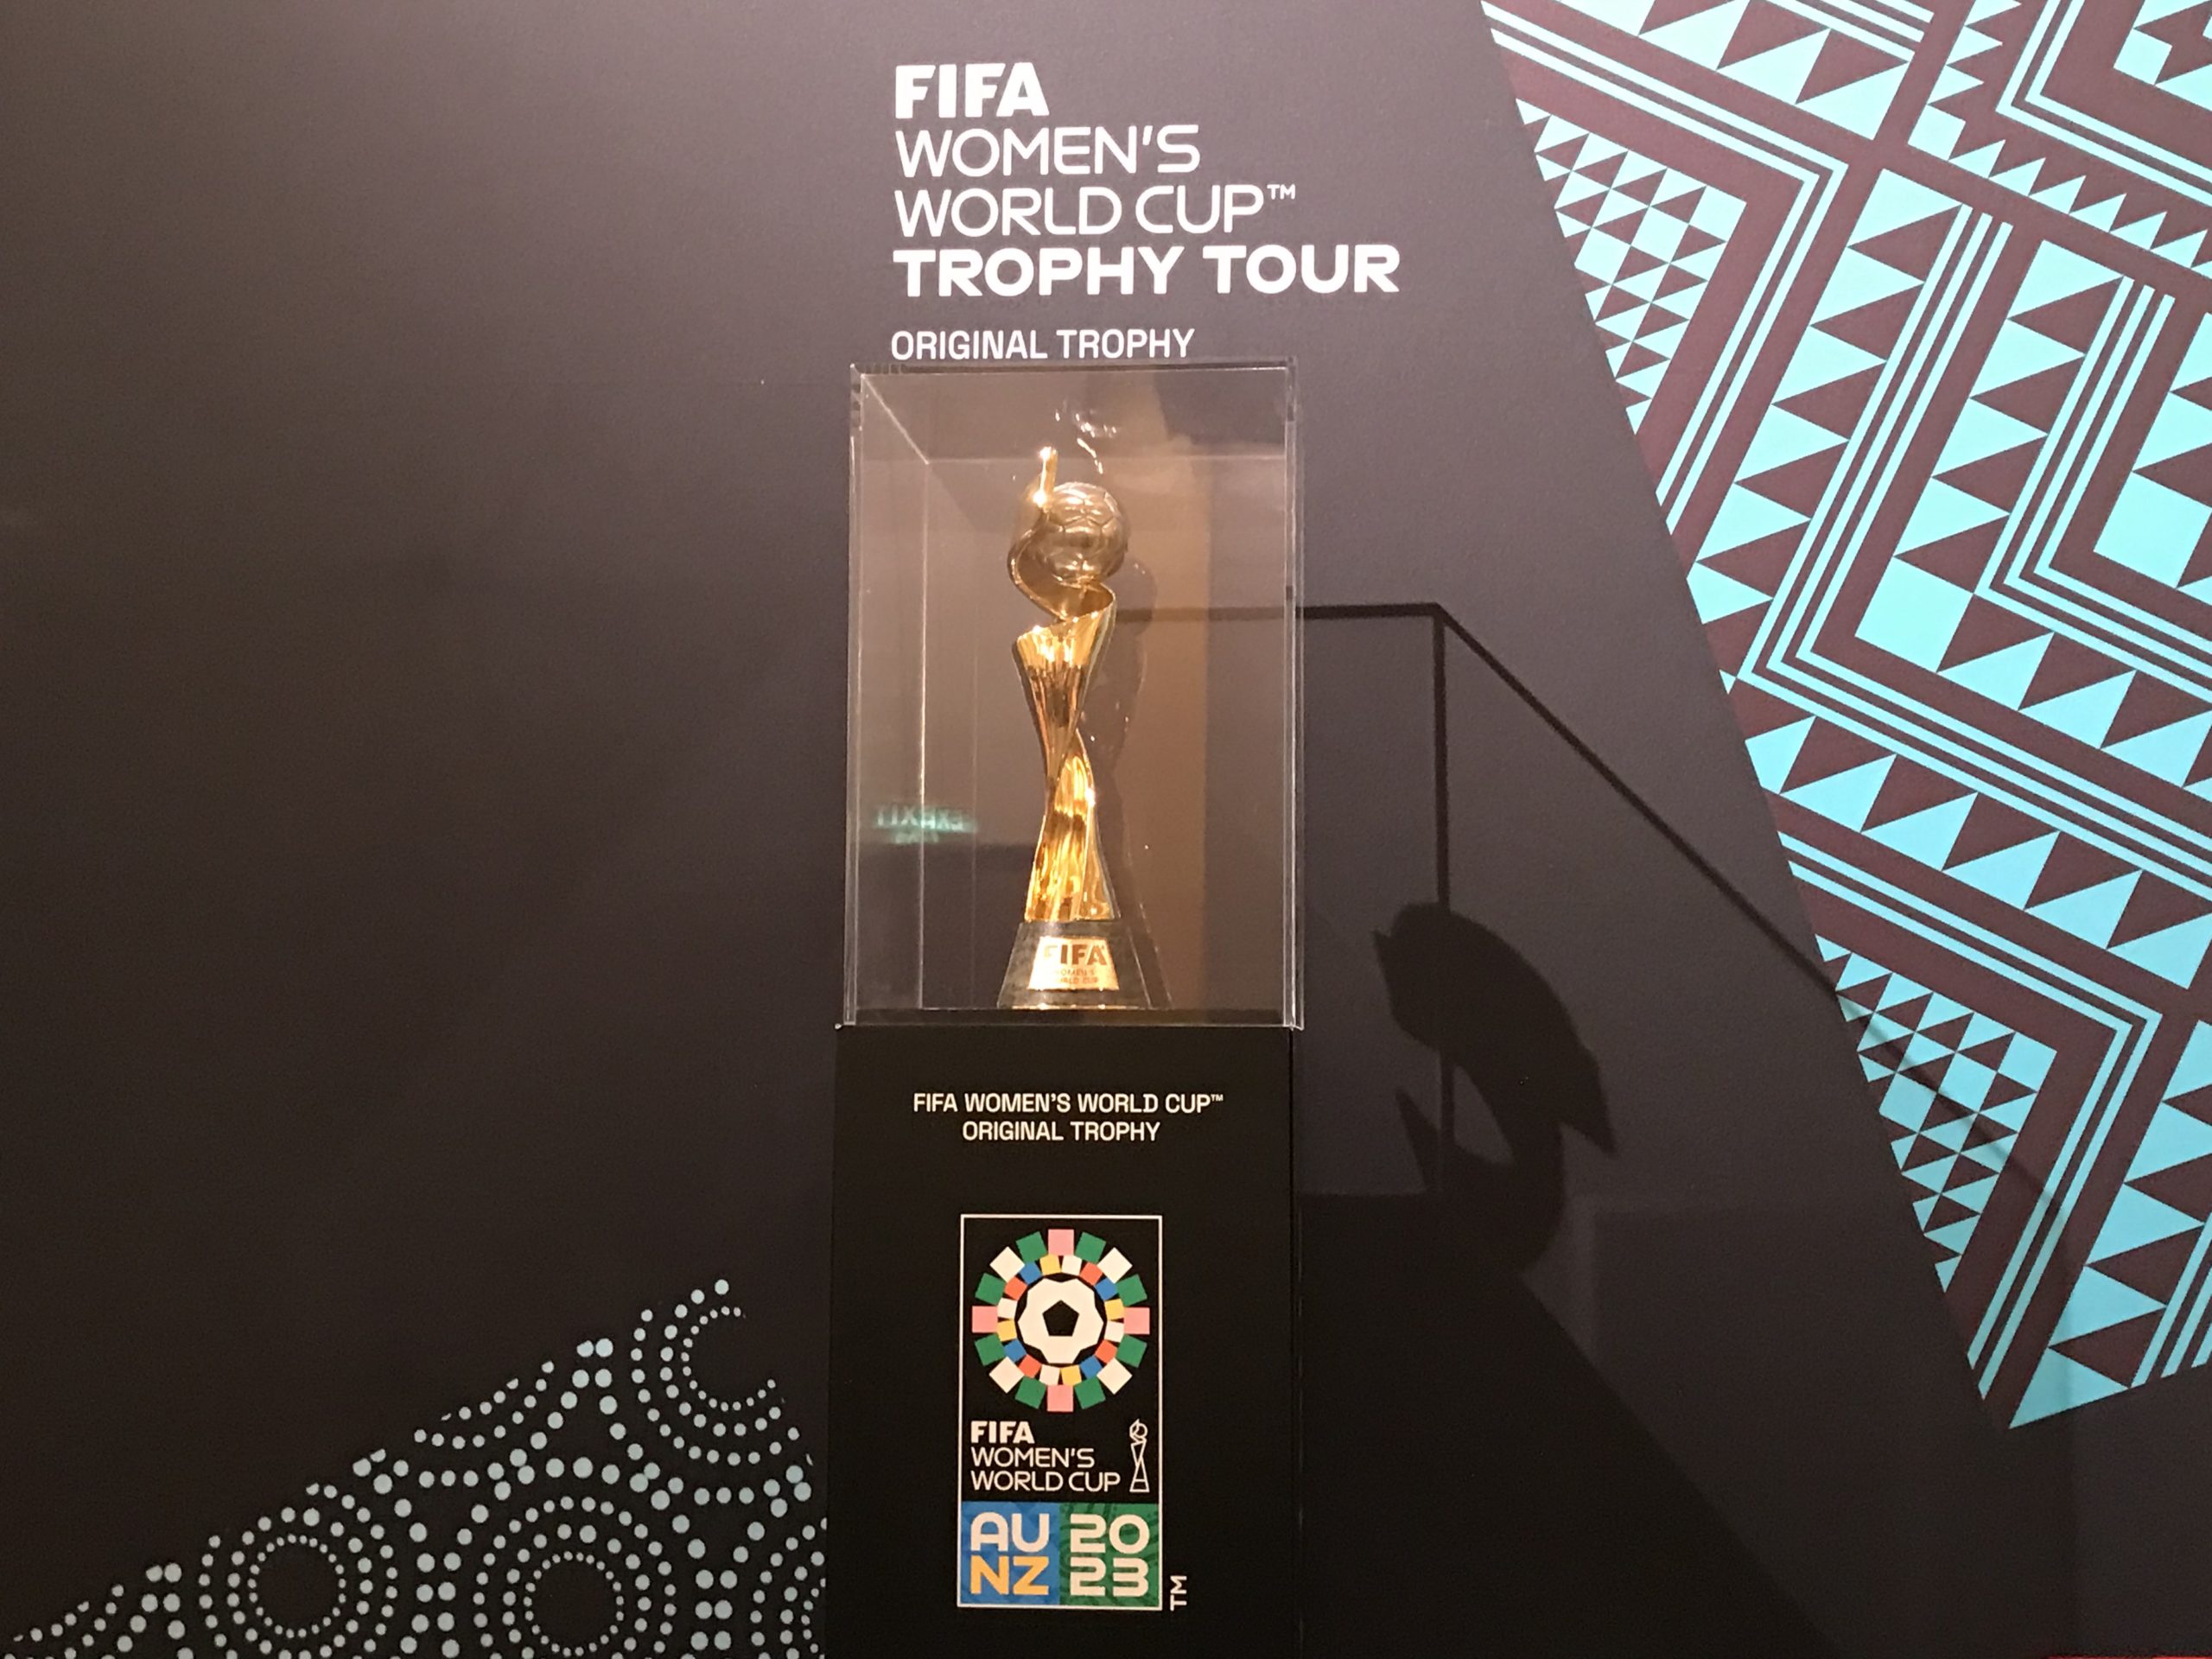 The Fifa Women’s World Cup trophy